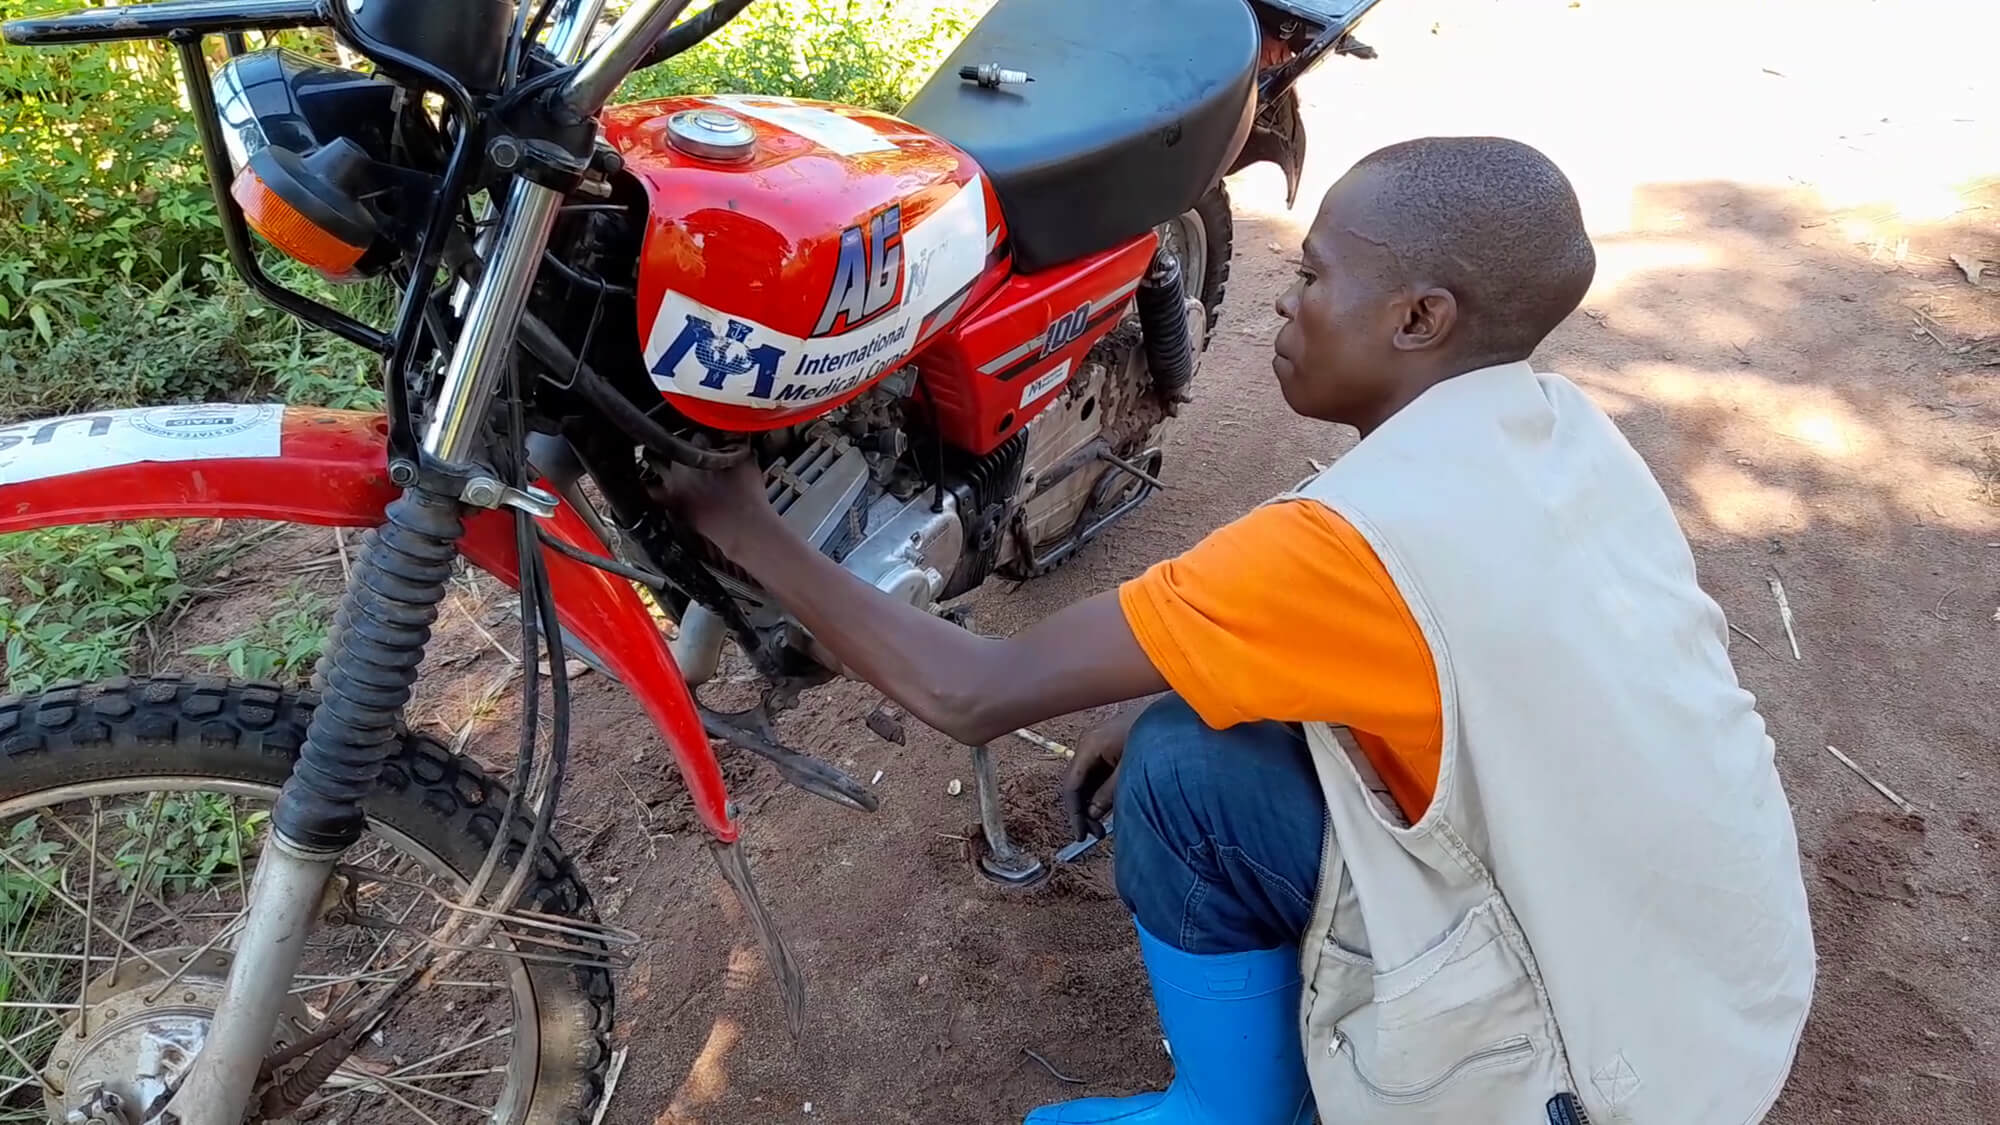 Djaile tries to repair a motorbike in the field when it refuses to start up.